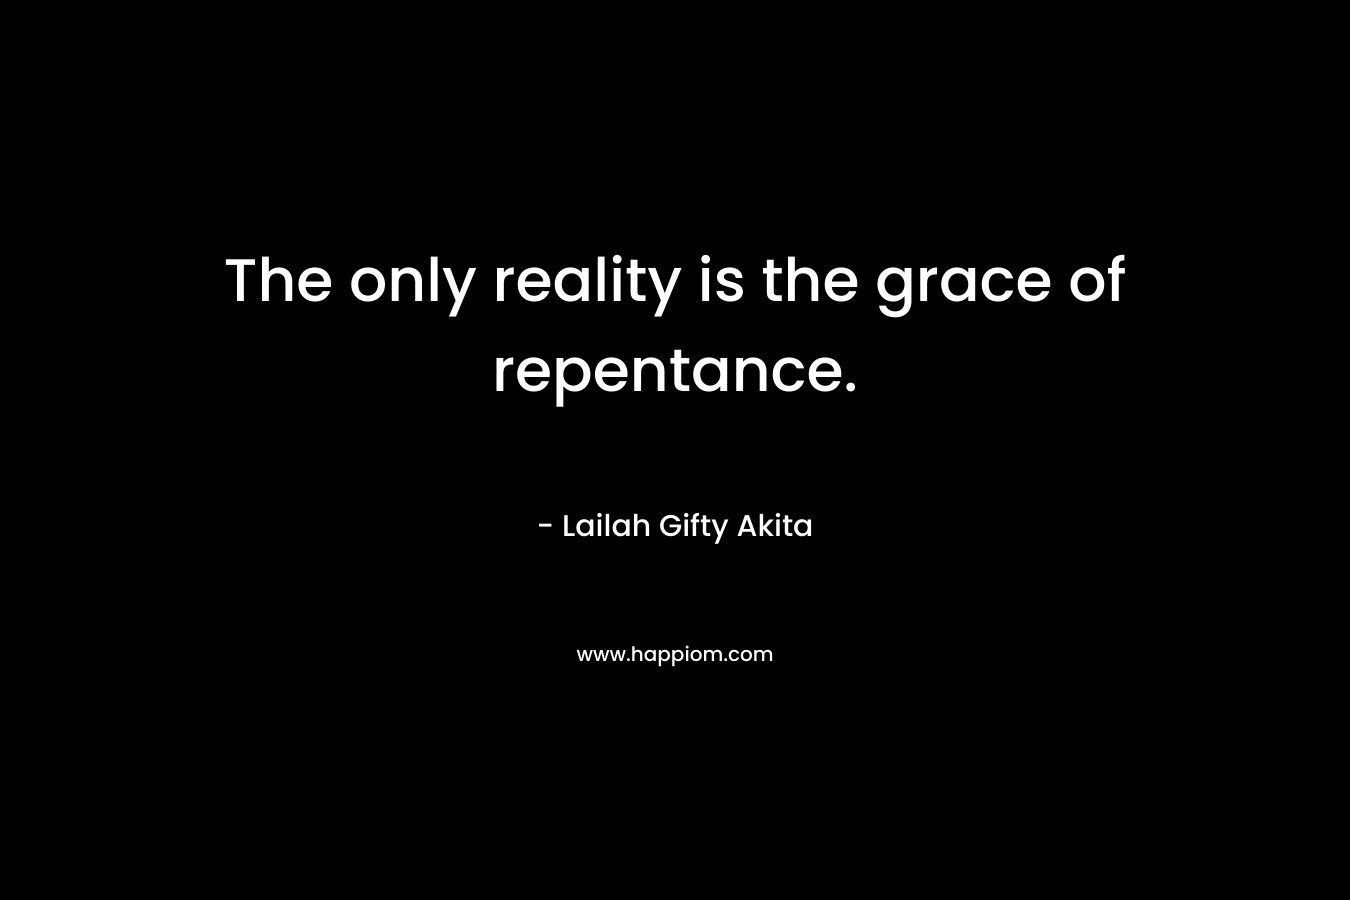 The only reality is the grace of repentance.